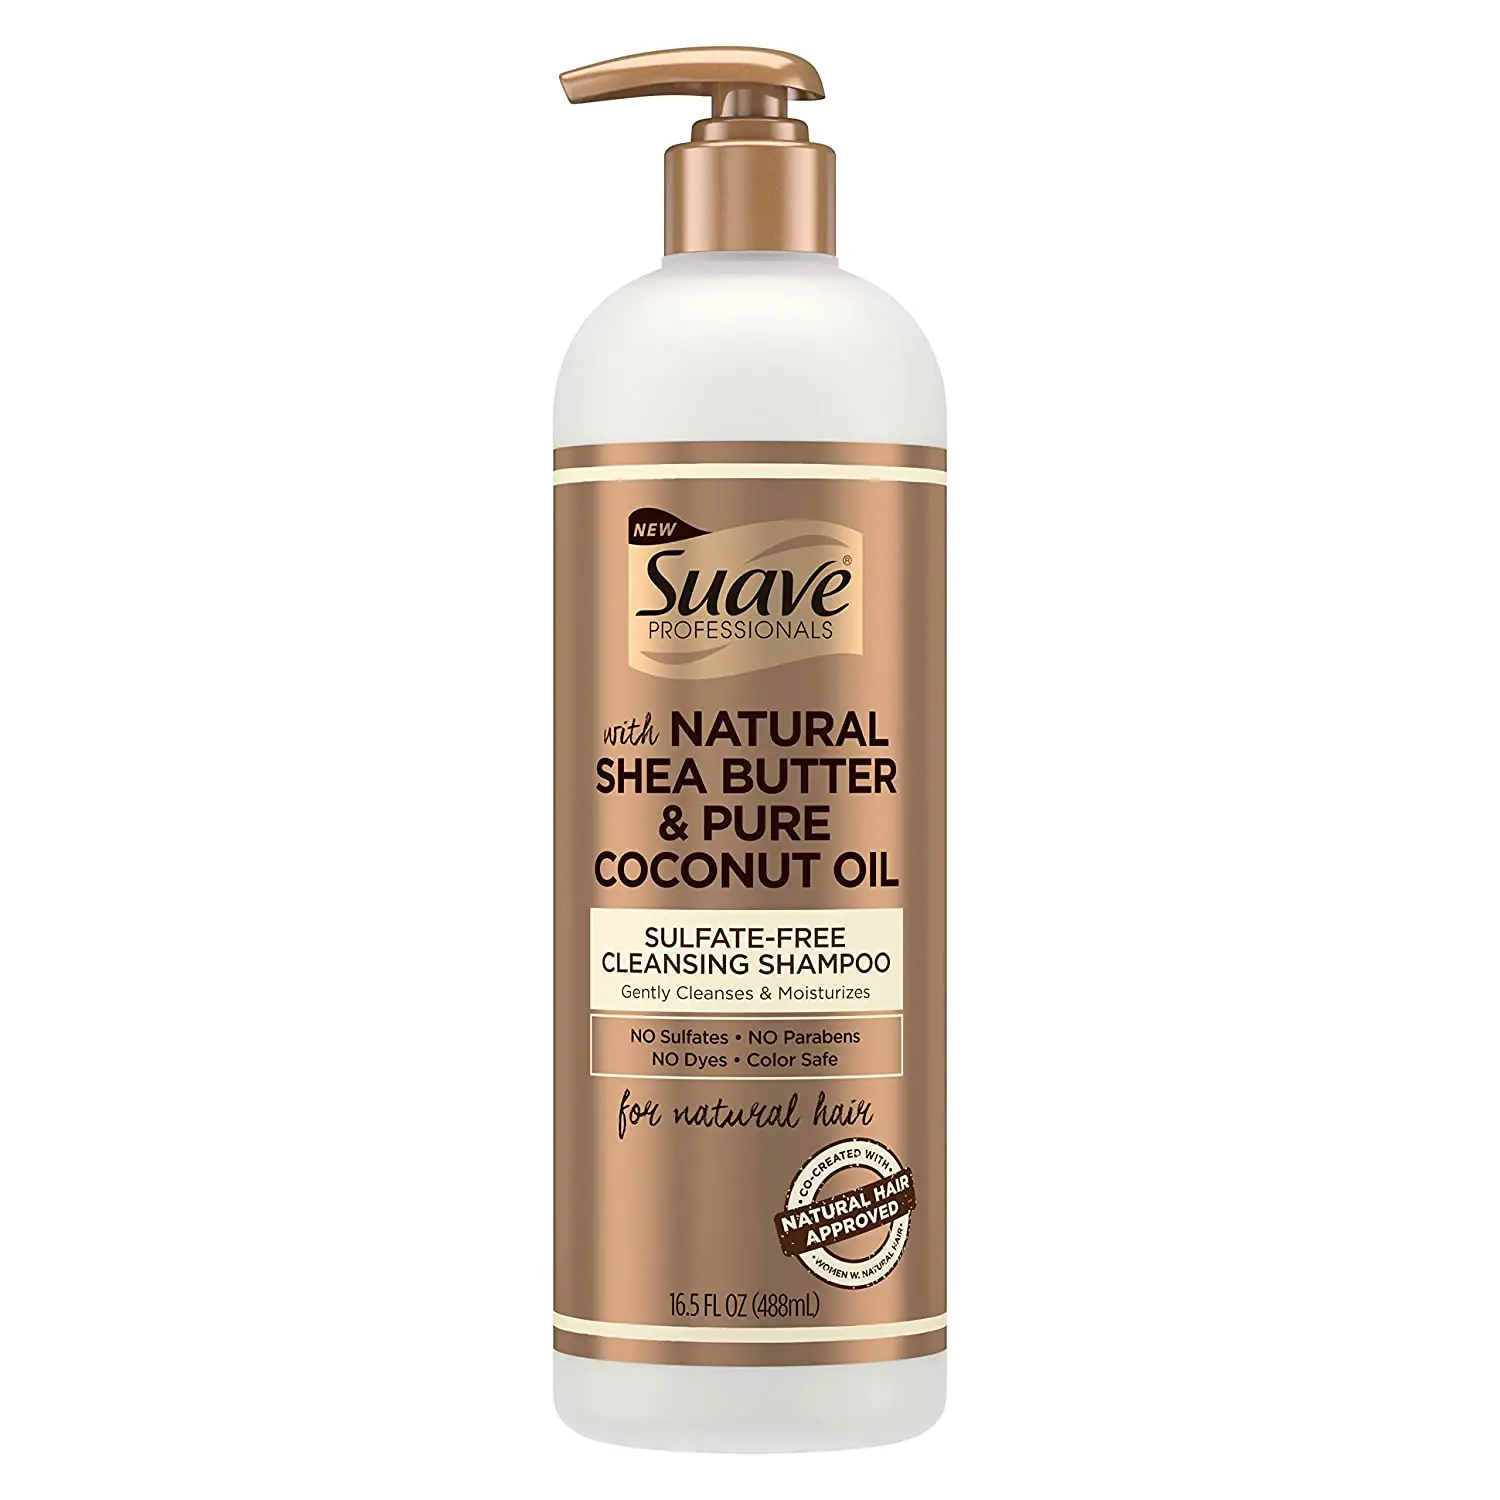 Suave Professionals Sulfate-free Cleansing Shampoo